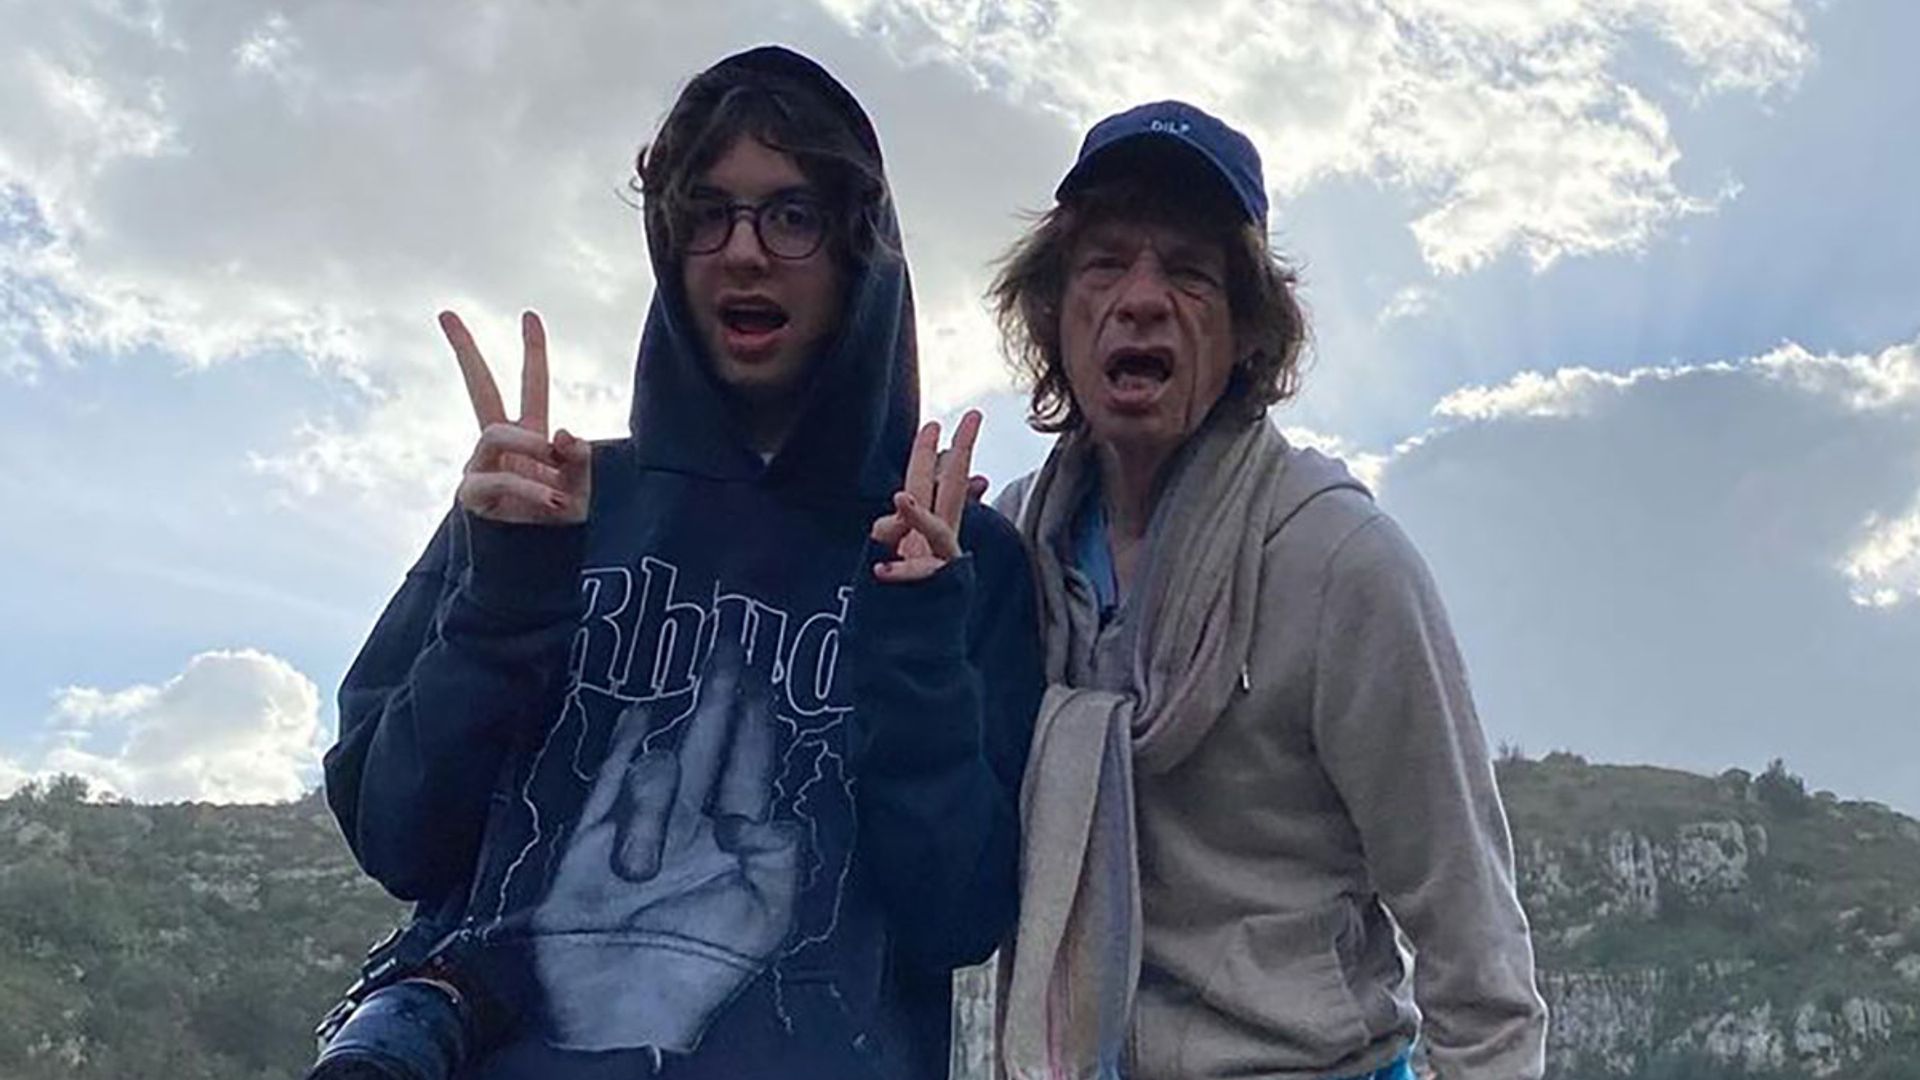 Mick Jagger shares downtime picture of him 'relaxing' – fans react